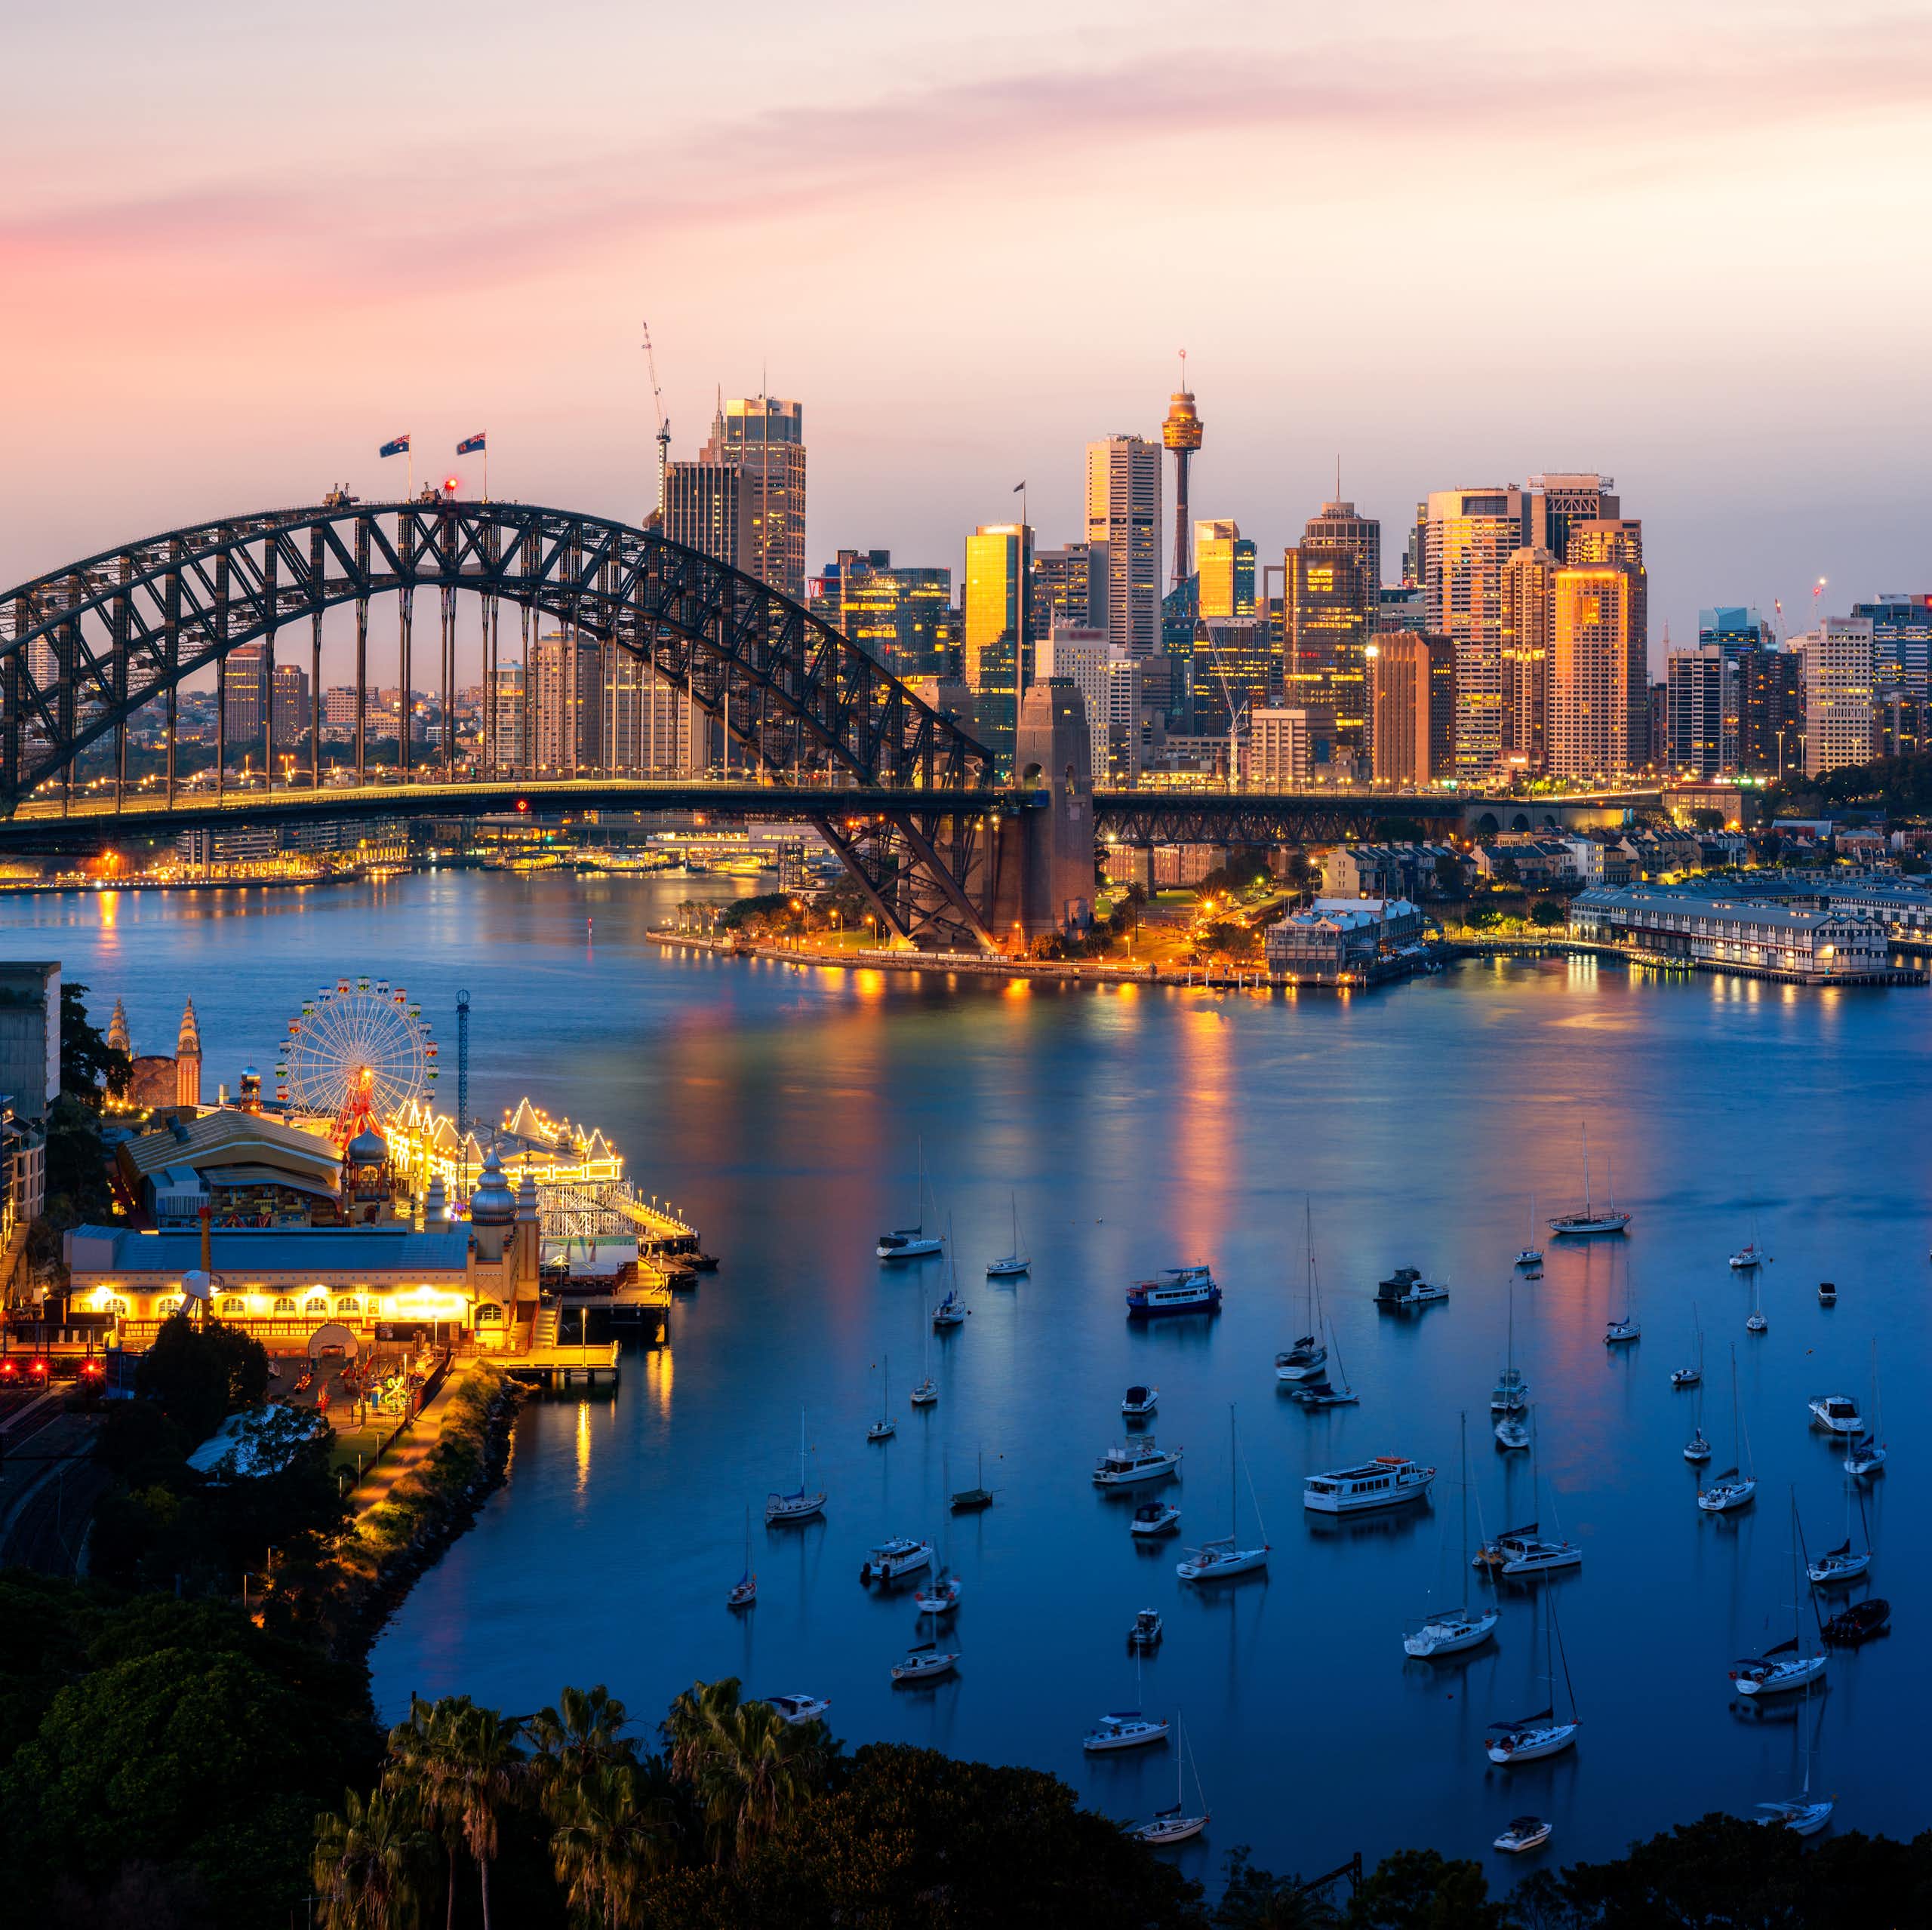 Sydney harbour and city seen in twilight